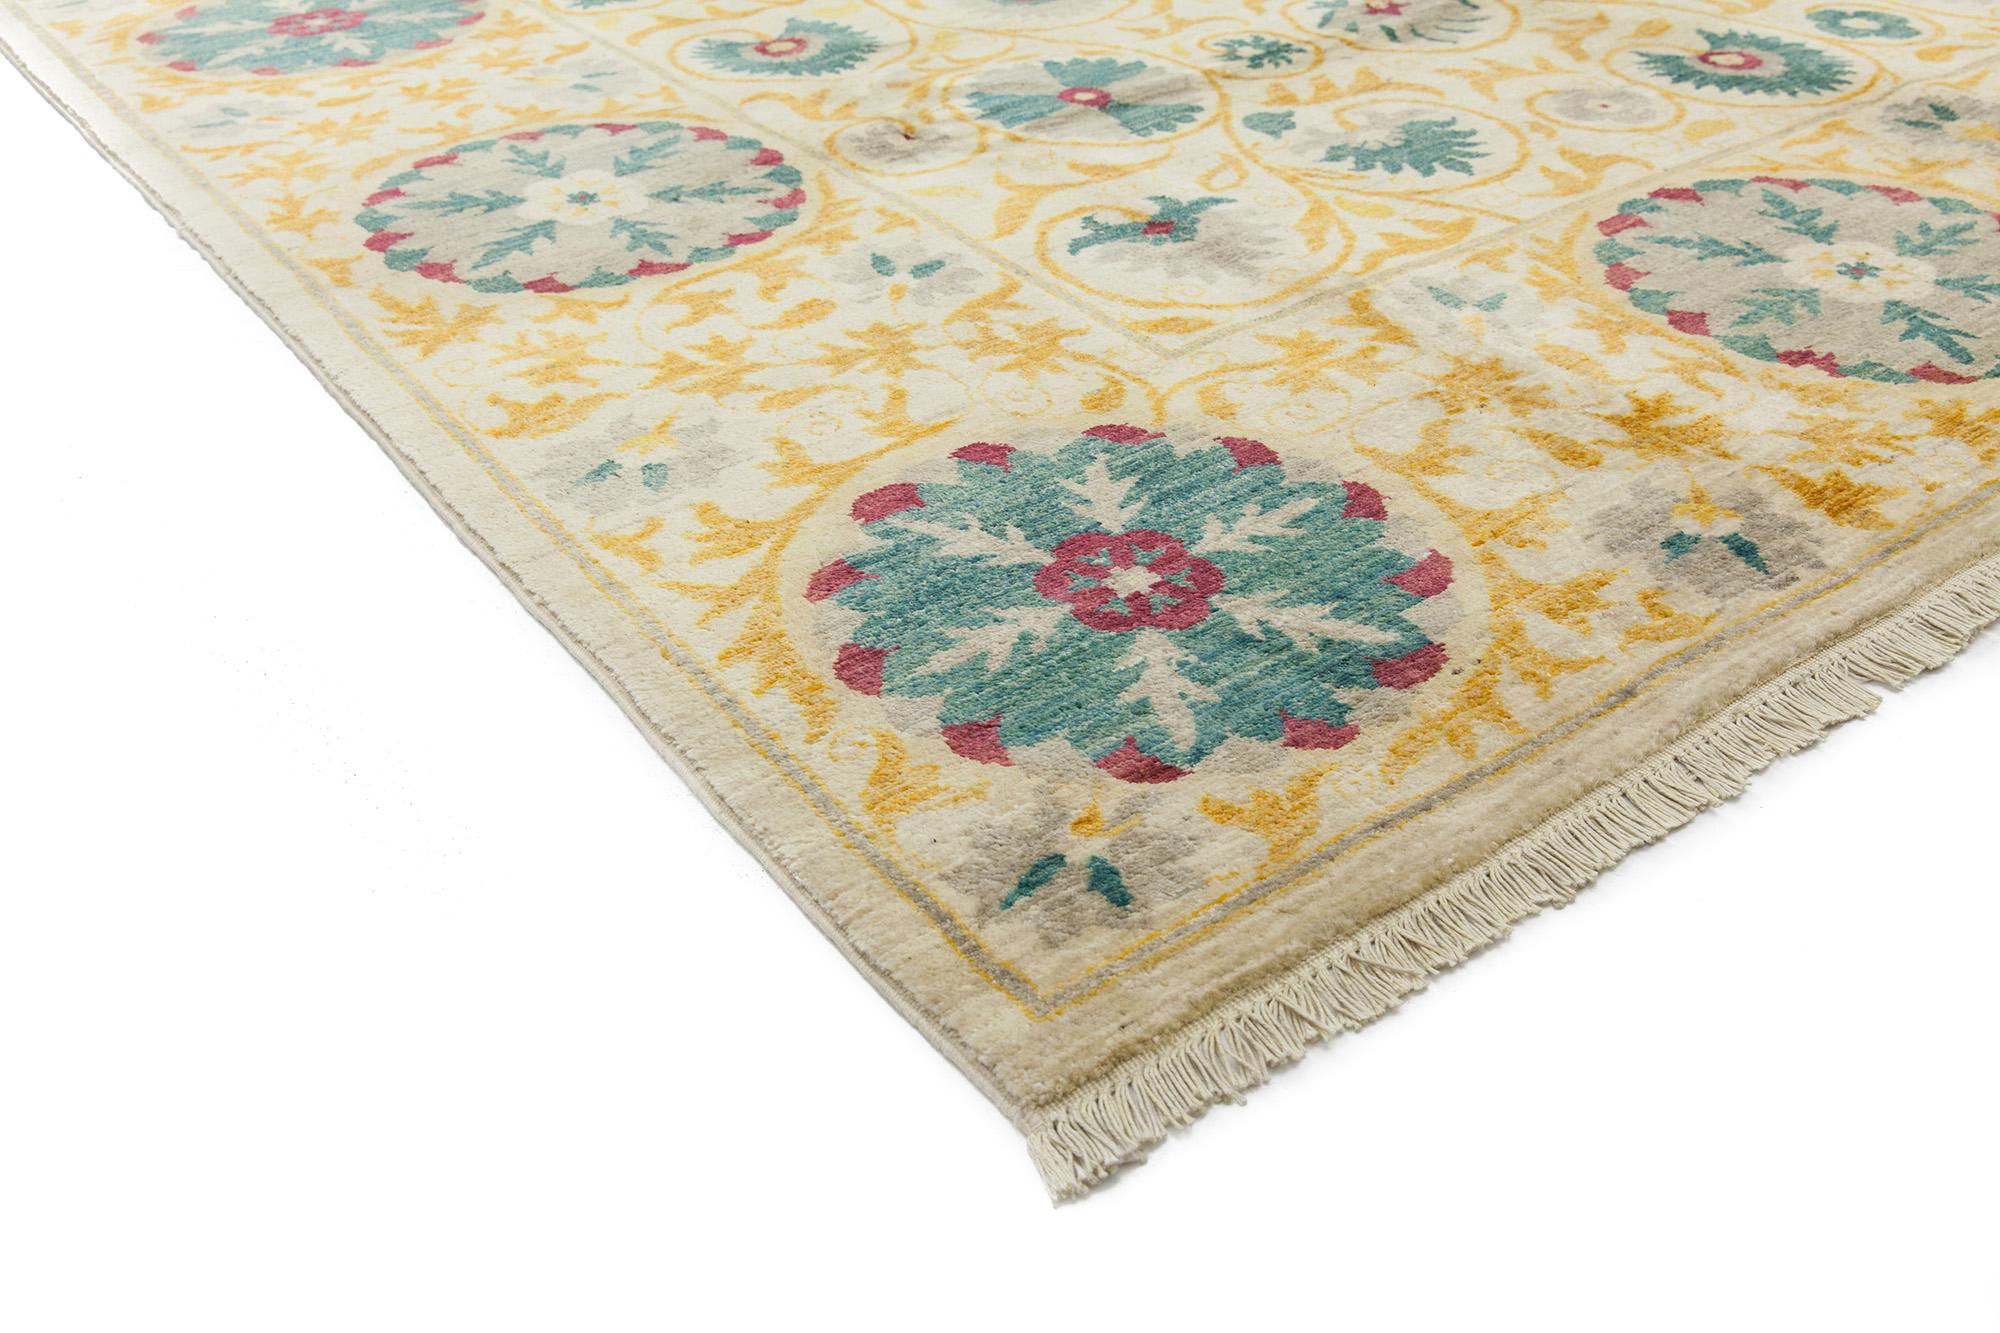 Color: Ivory - Made In: Pakistan. 100% Wool. Whether boasting a field of flowers or ancient tribal symbols, patterned rugs are the easiest way to enrich a space. Subtle colors and intricate motifs reinforce the quiet sophistication of a traditional